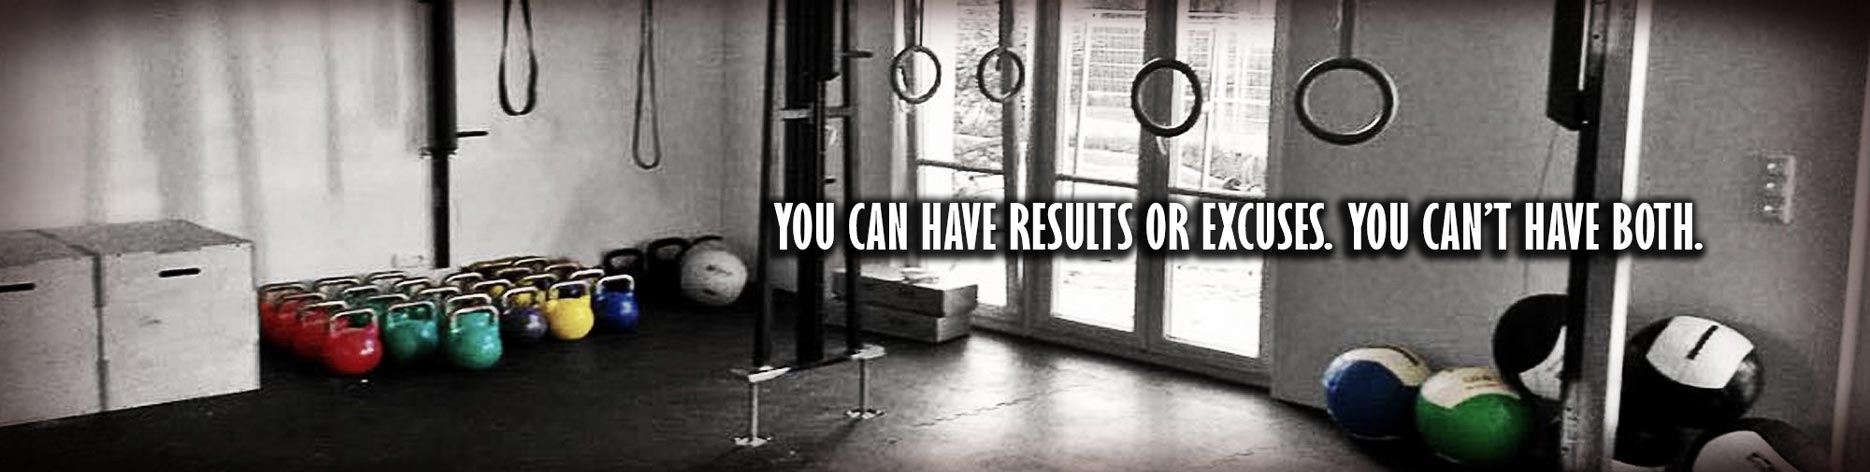 You can have results or excuses. You can't have both.